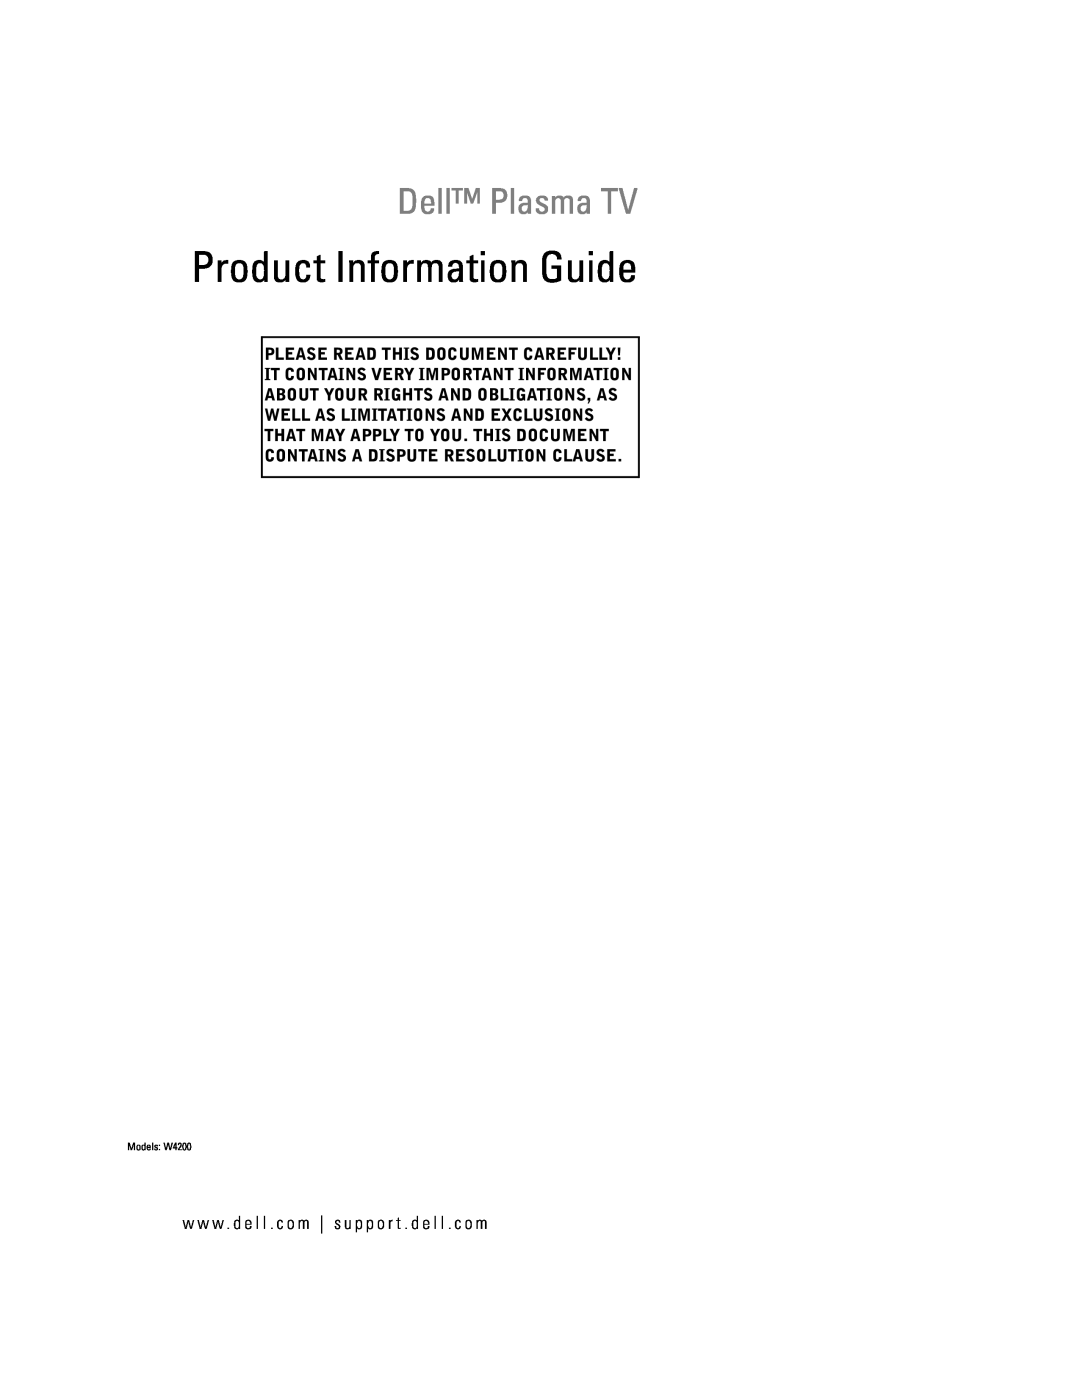 Dell W4200 Please Read This Document Carefully, It Contains Very Important Information, Well As Limitations And Exclusions 